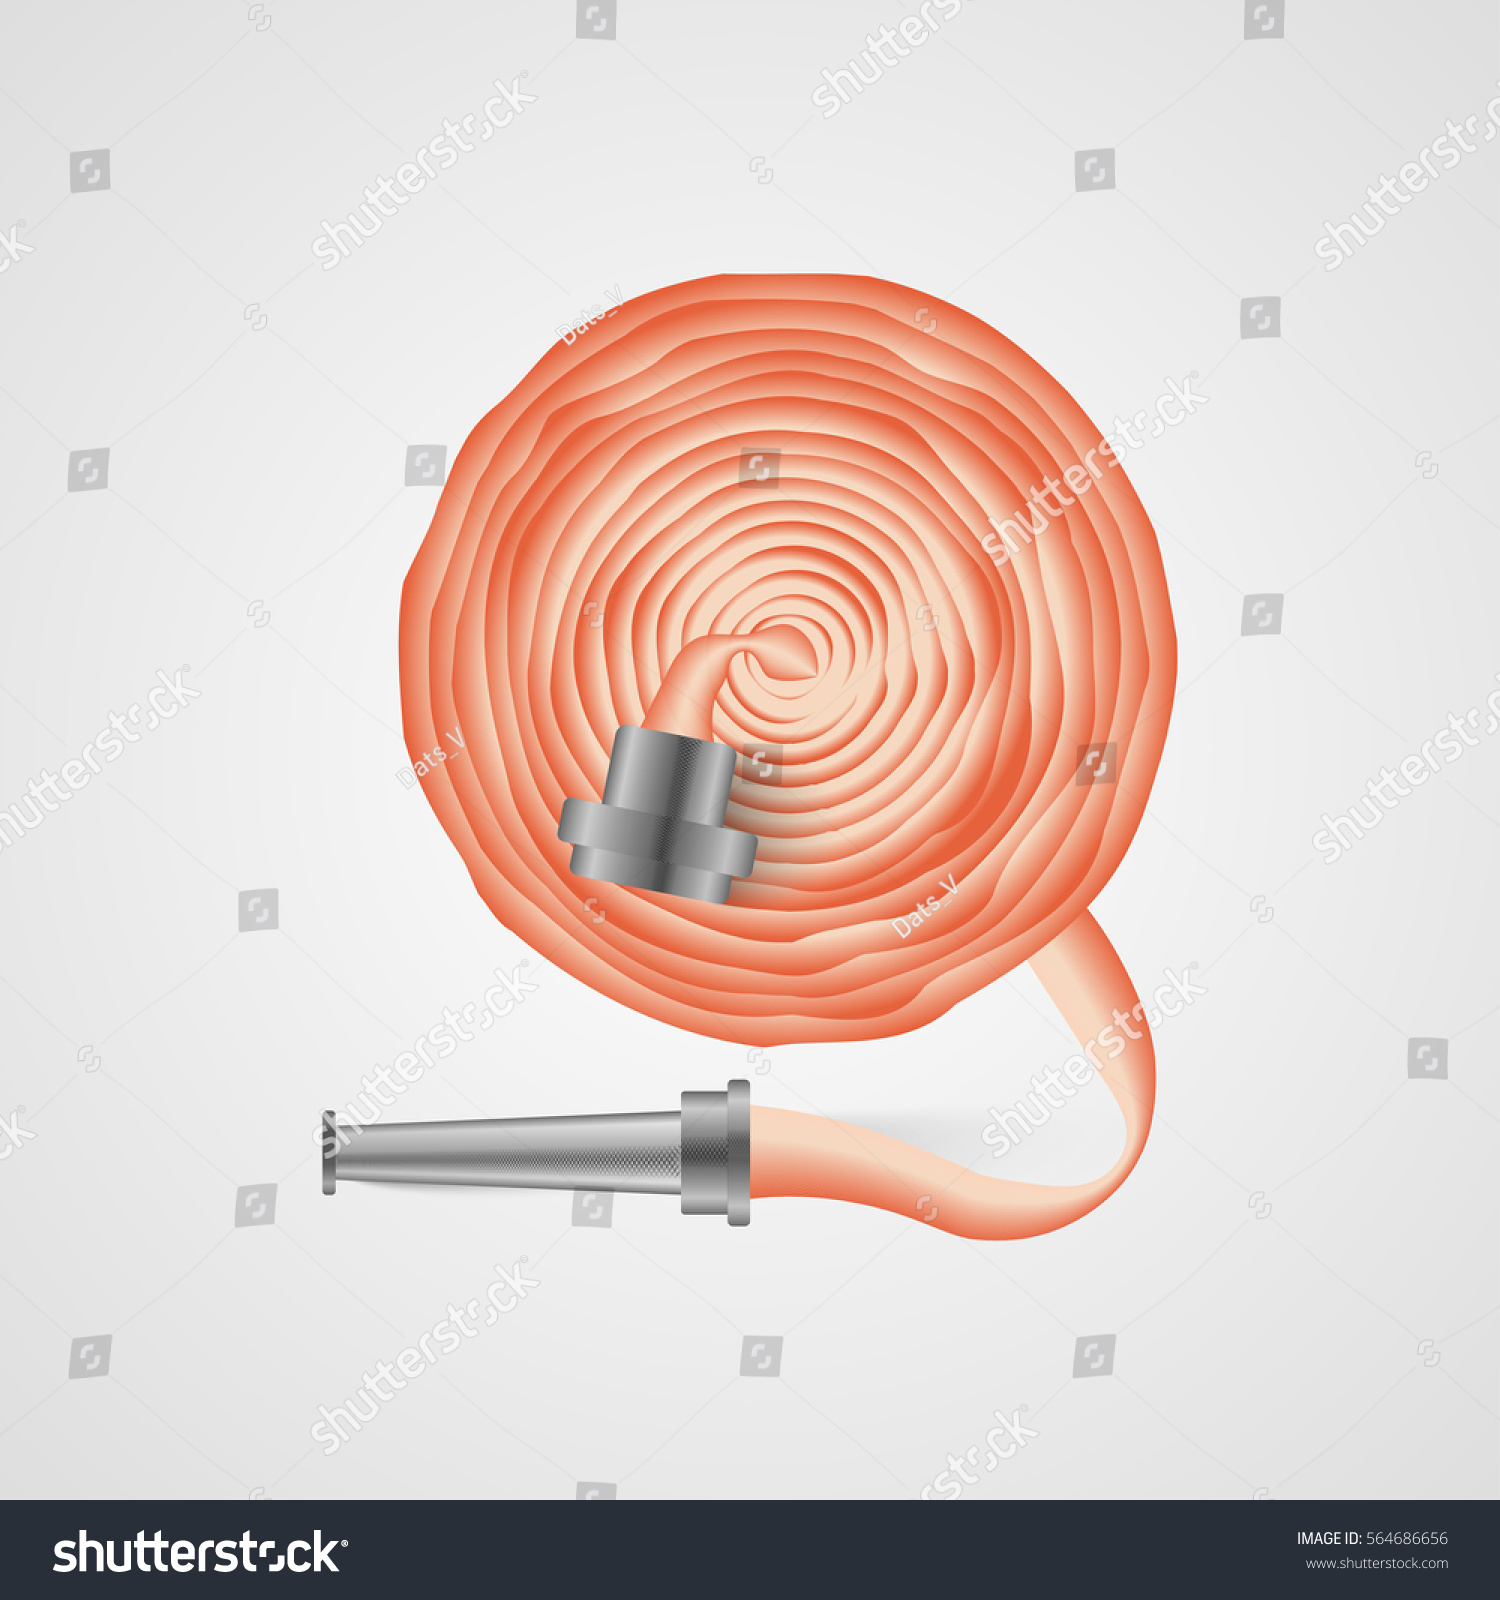 Real Red Fire Hose Vector Stock Vector 564686656 - Shutterstock